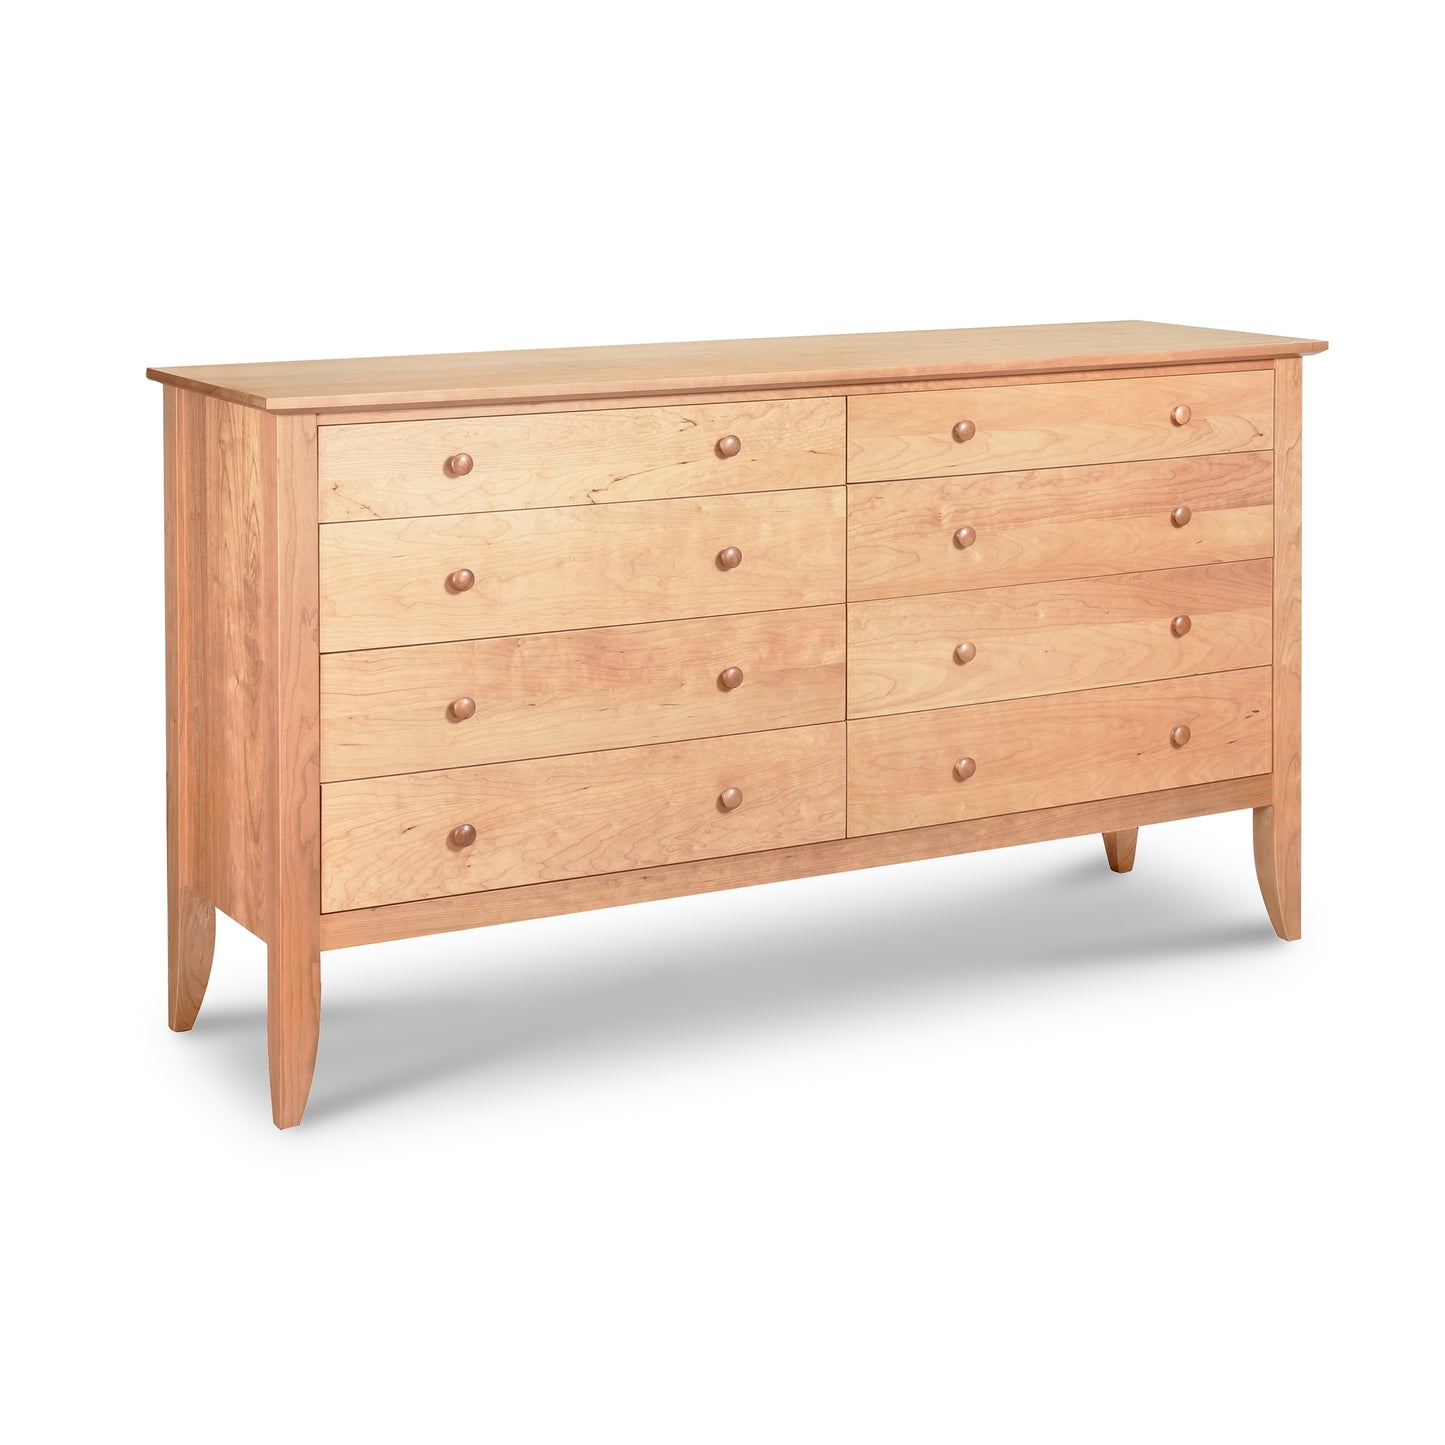 A Bow Front 8-Drawer Dresser by Lyndon Furniture with drawers on a white background is a stylish furniture piece.